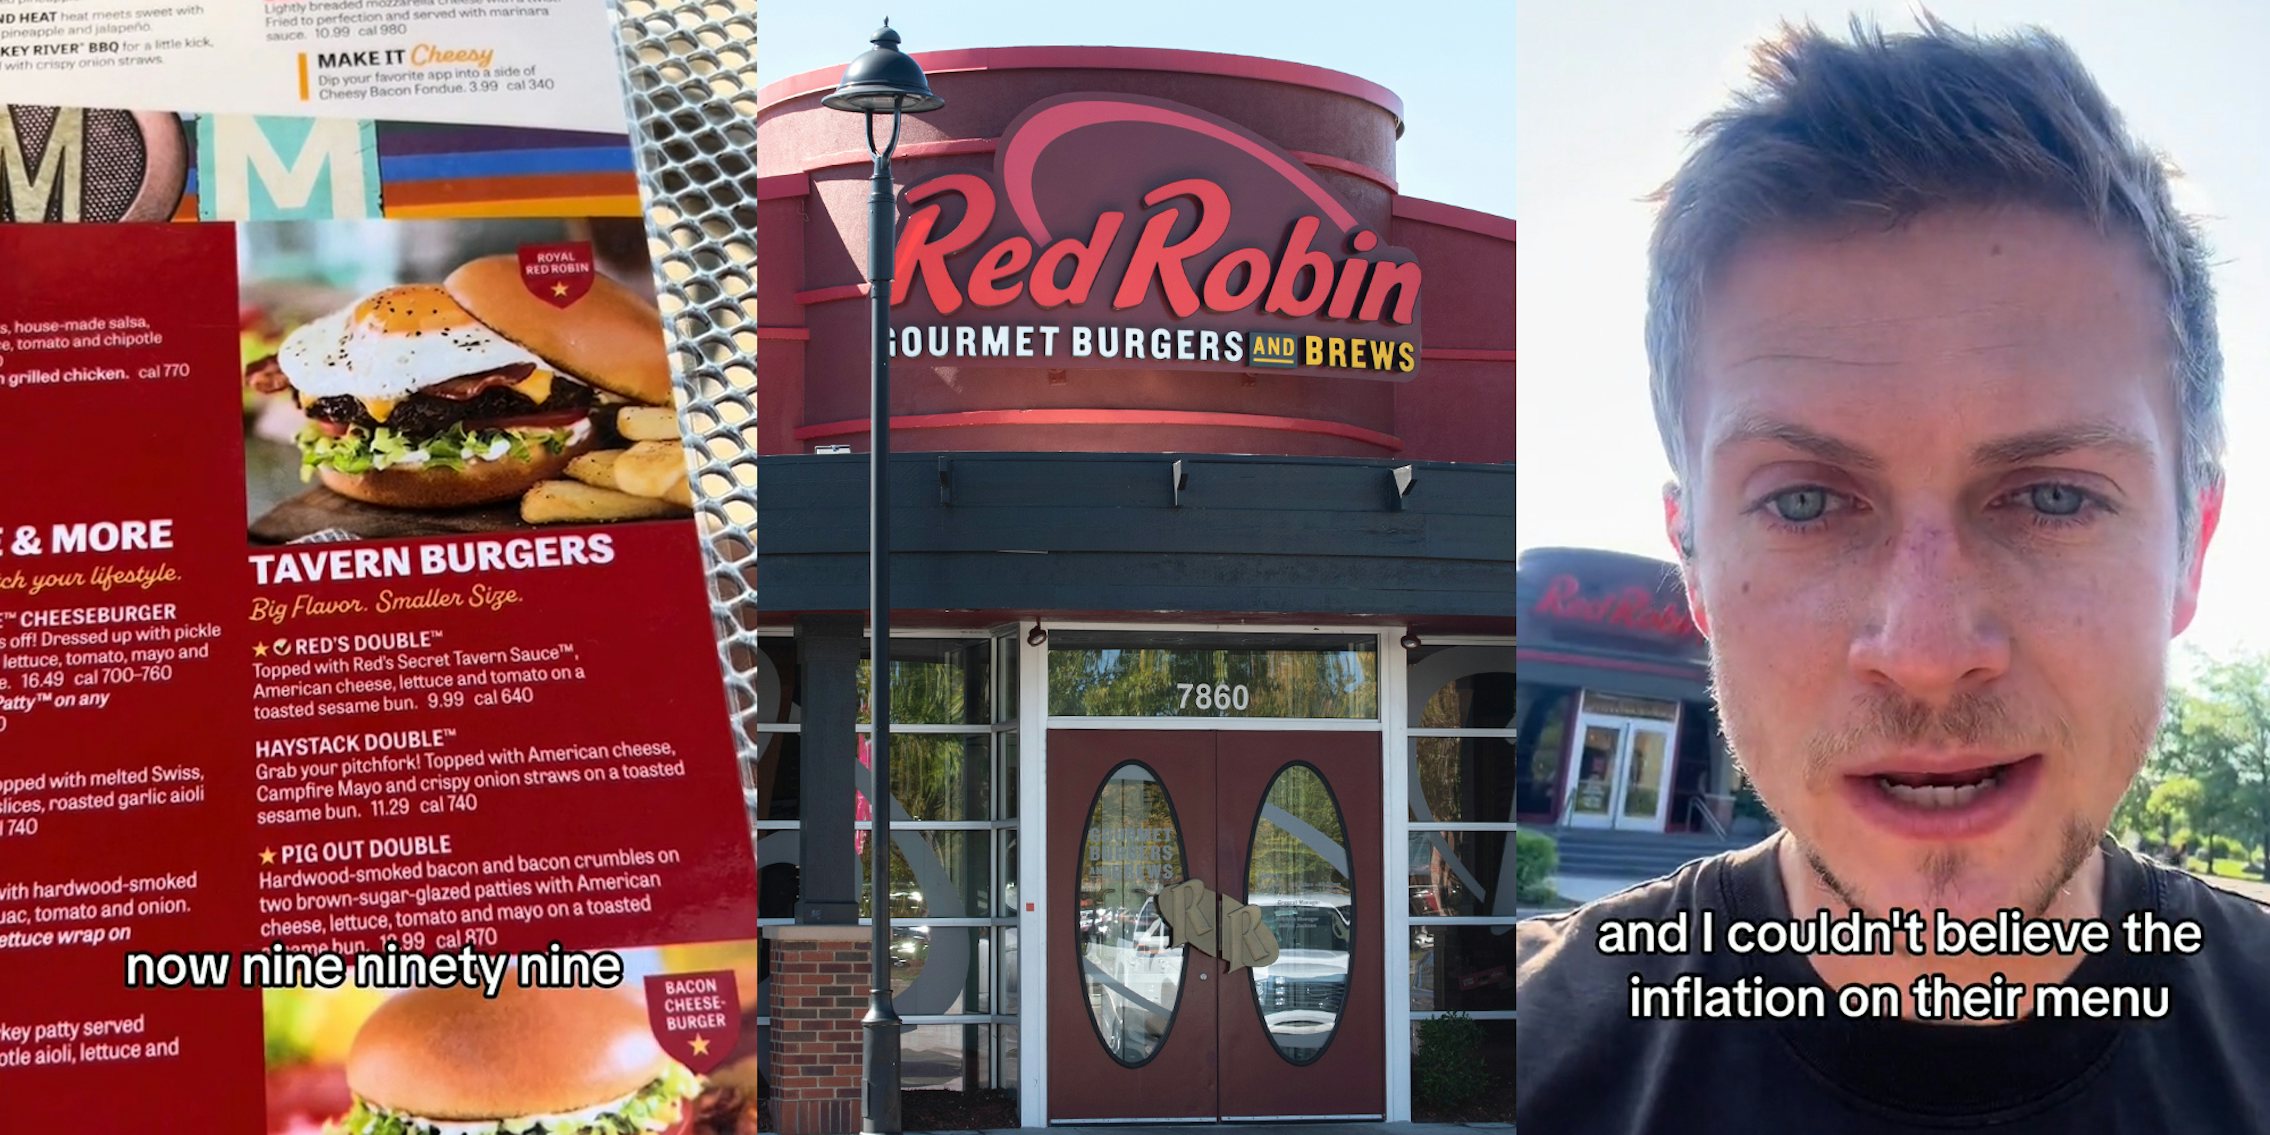 Red Robin menu with caption 'now nine ninety nine' (l) Red Robin building entrance with sign (c) Red Robin customer speaking outside with caption 'and I couldn't believe the inflation on their menu' (r)